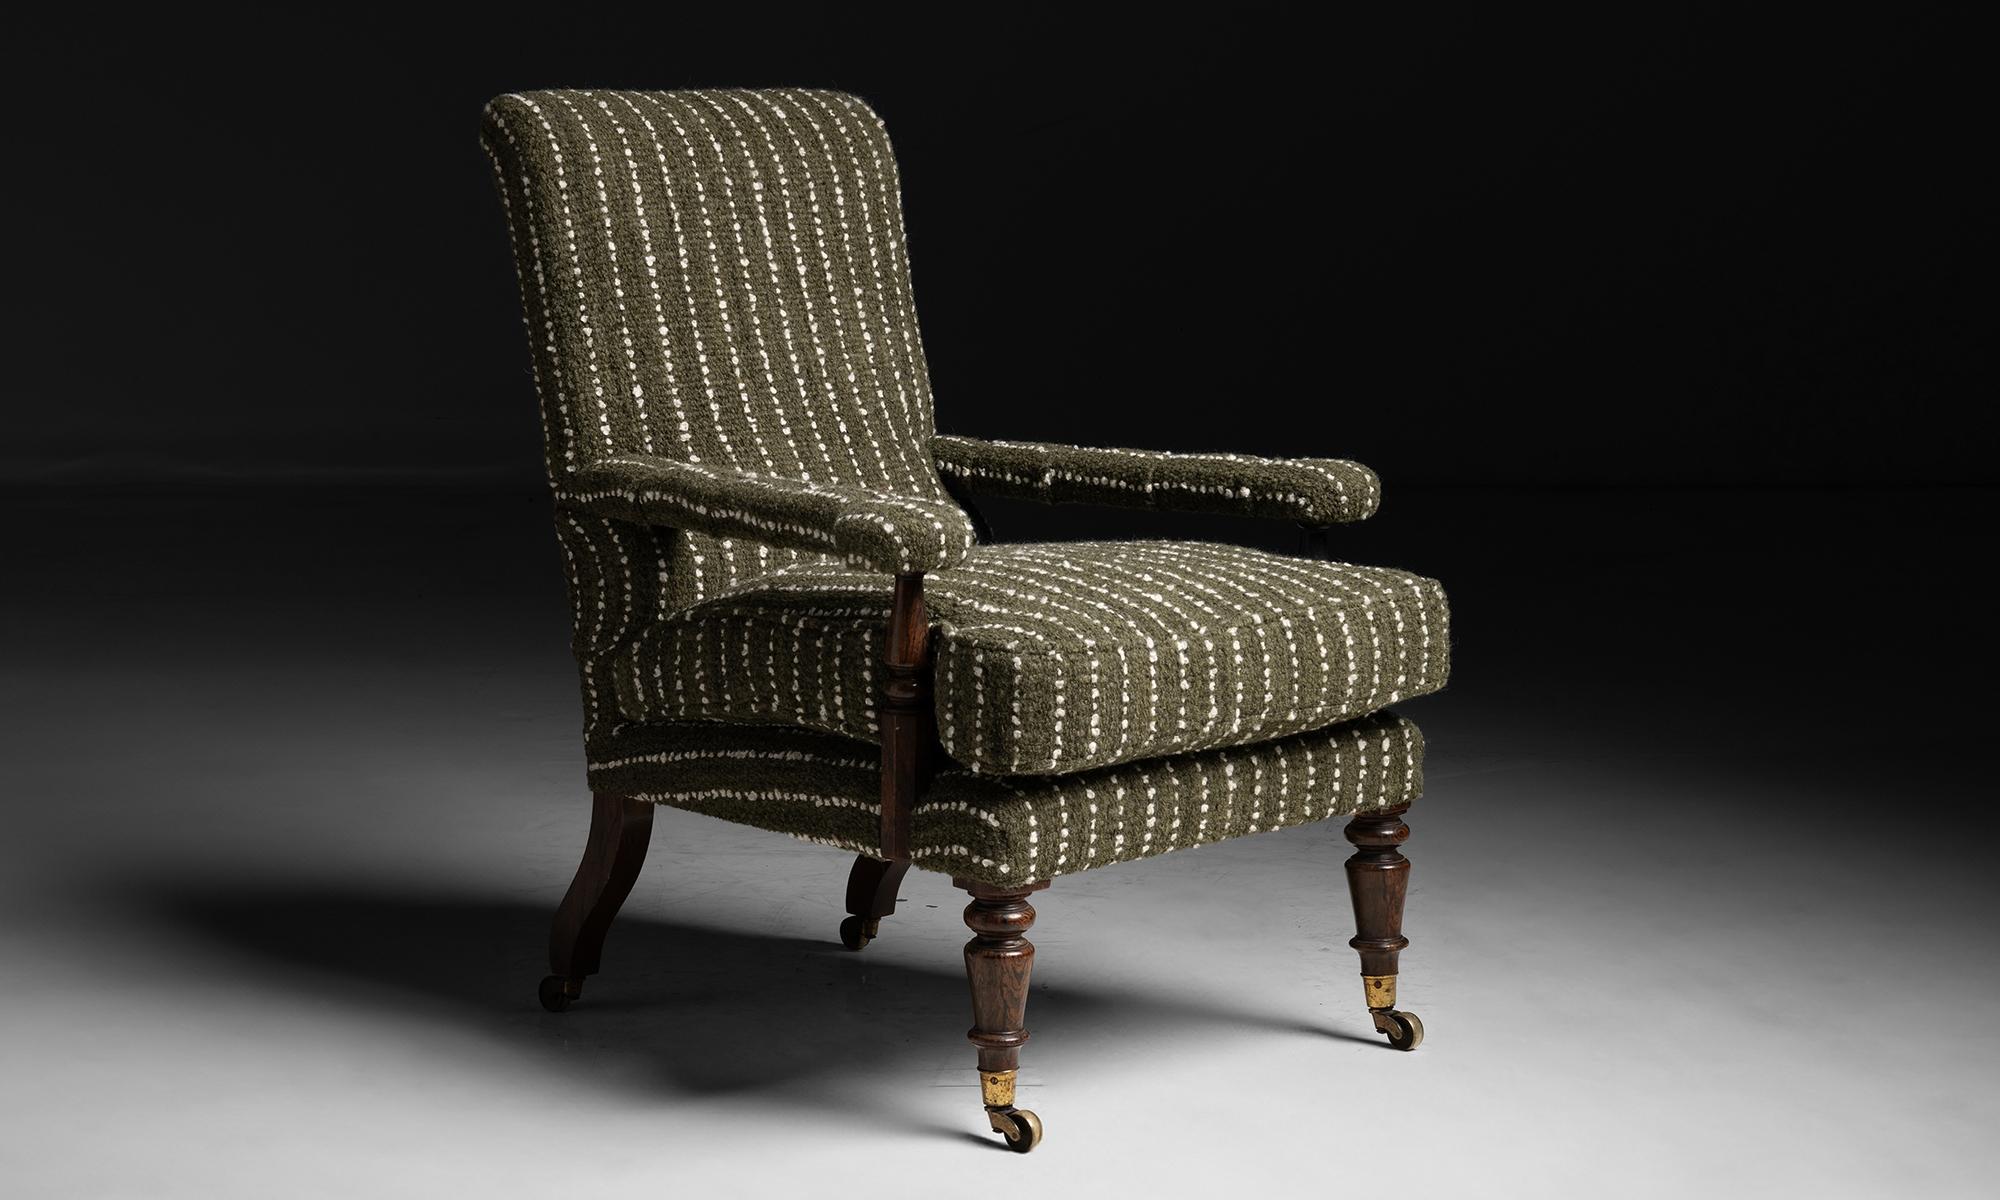 Miles & Edwards Armchair in Rosemary Hallgarten Fabric
England circa 1840
Antique frame with faux rosewood legs and original castors. Newly upholstered in chalk stripe alpaca blend by Rosemary Hallgarten.
28”w x 30”d x 37”h x 19”seat